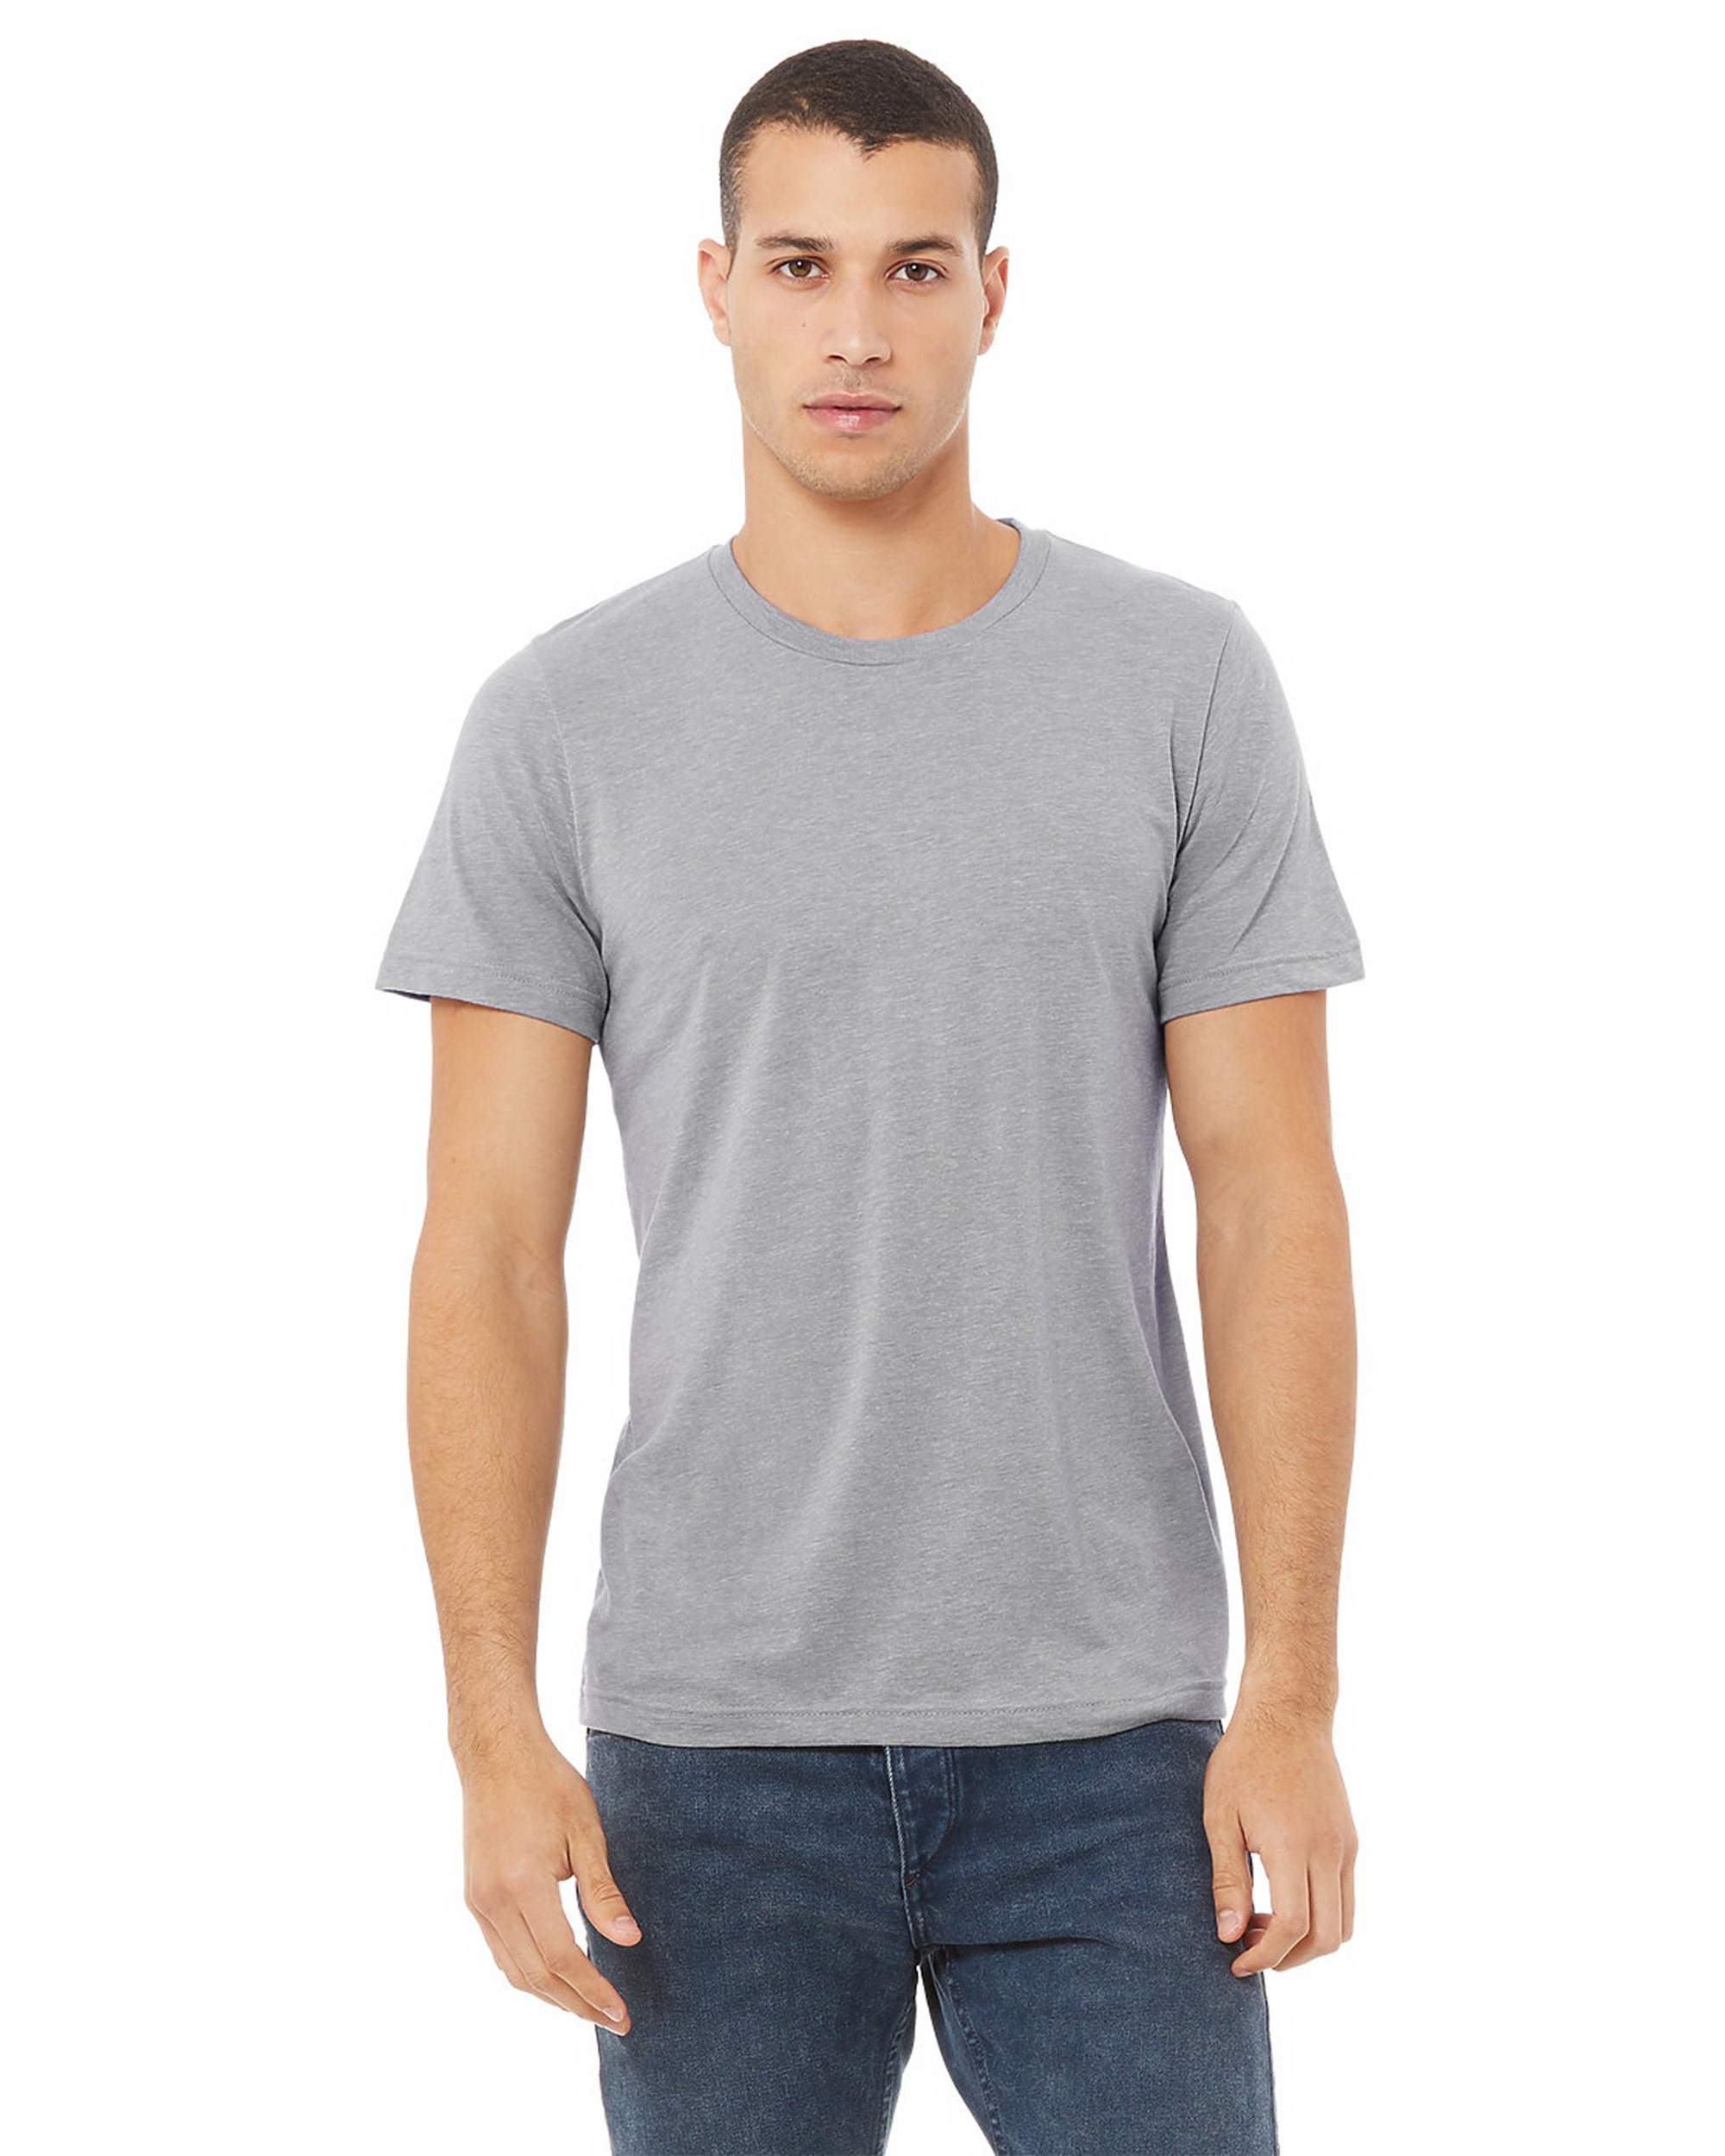 BELLA+CANVAS® 3413 Unisex Triblend Short Sleeve Tee, shown in Athletic Grey Triblend